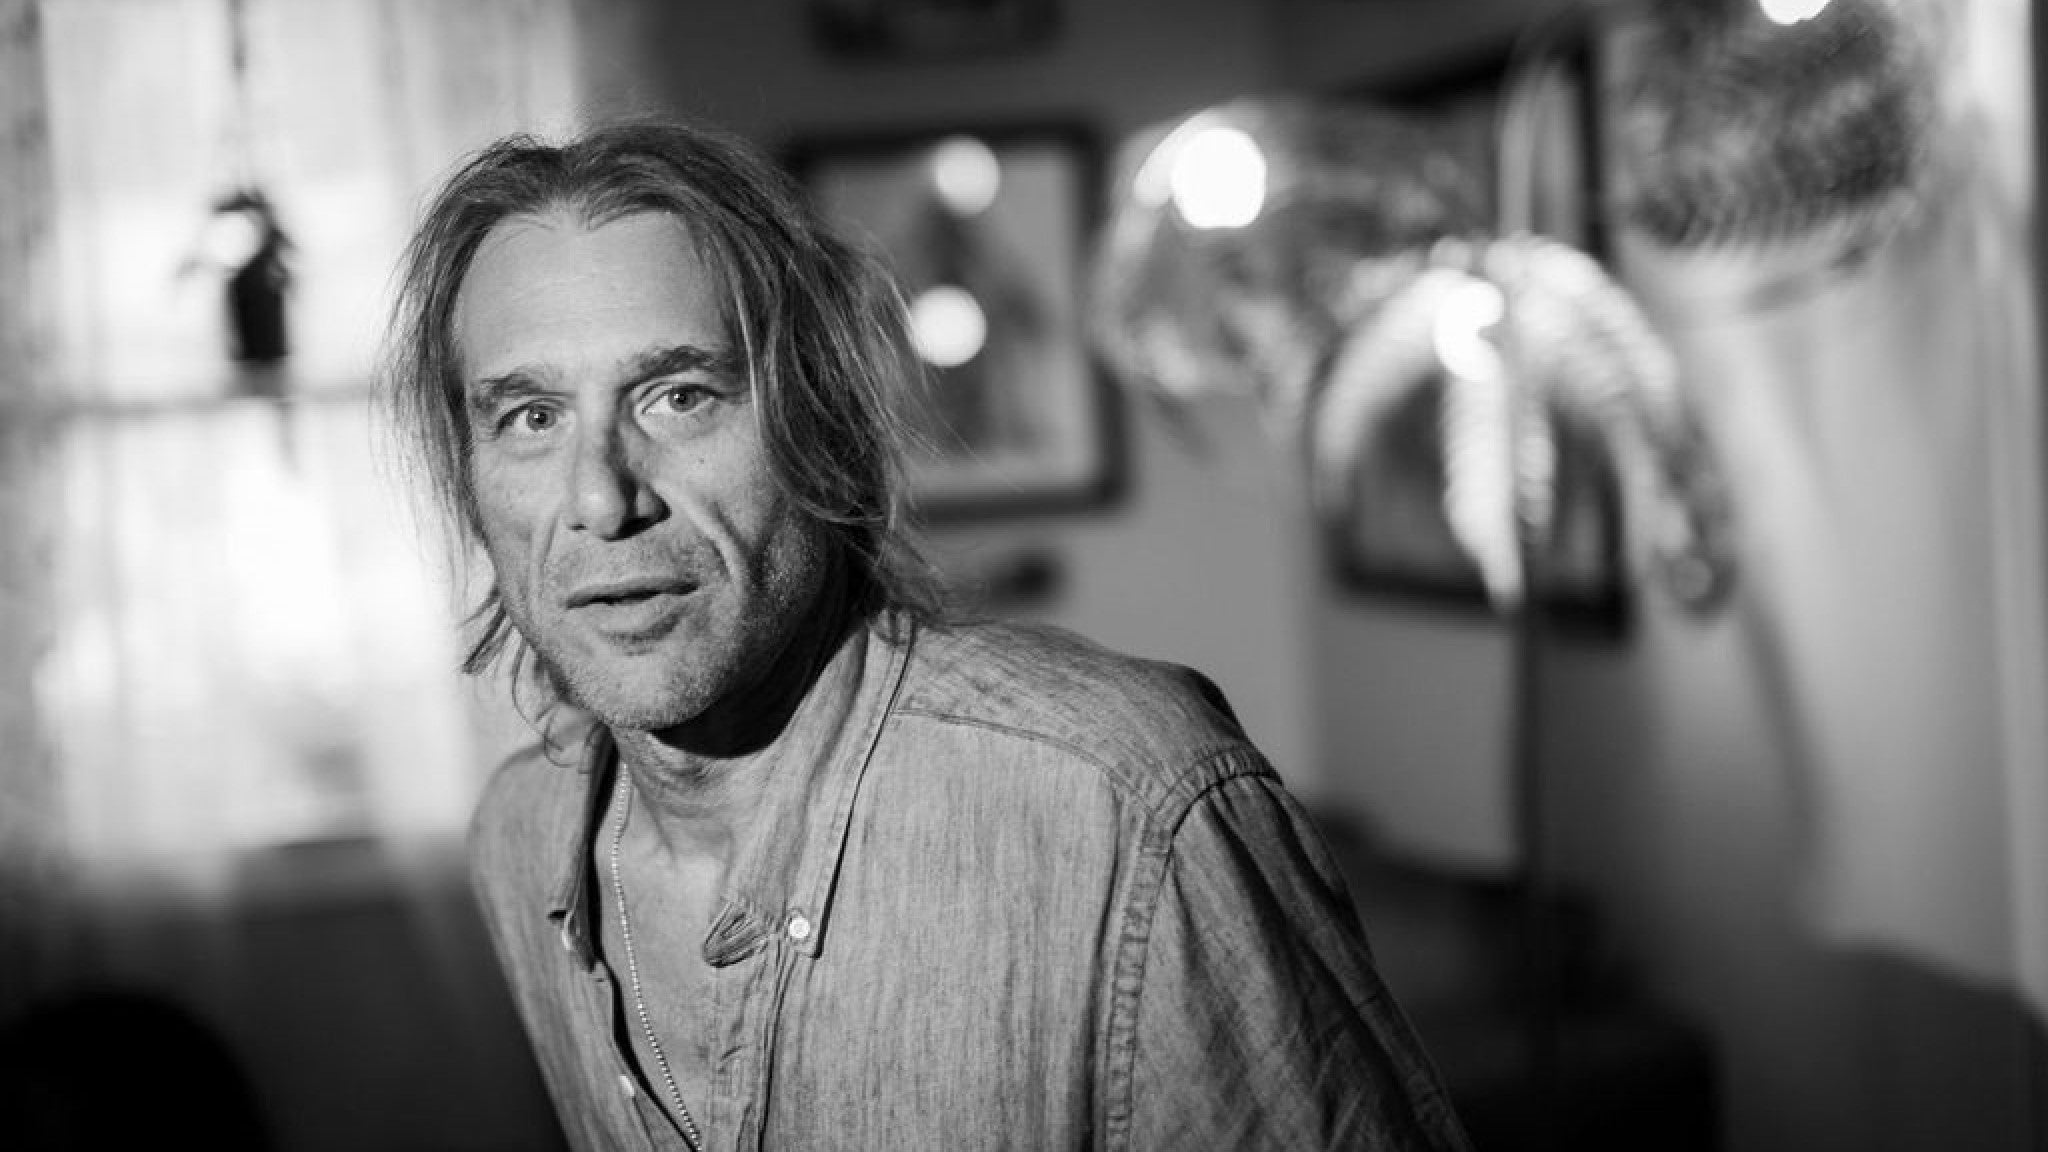 Todd Snider in Boise promo photo for Day of Show presale offer code